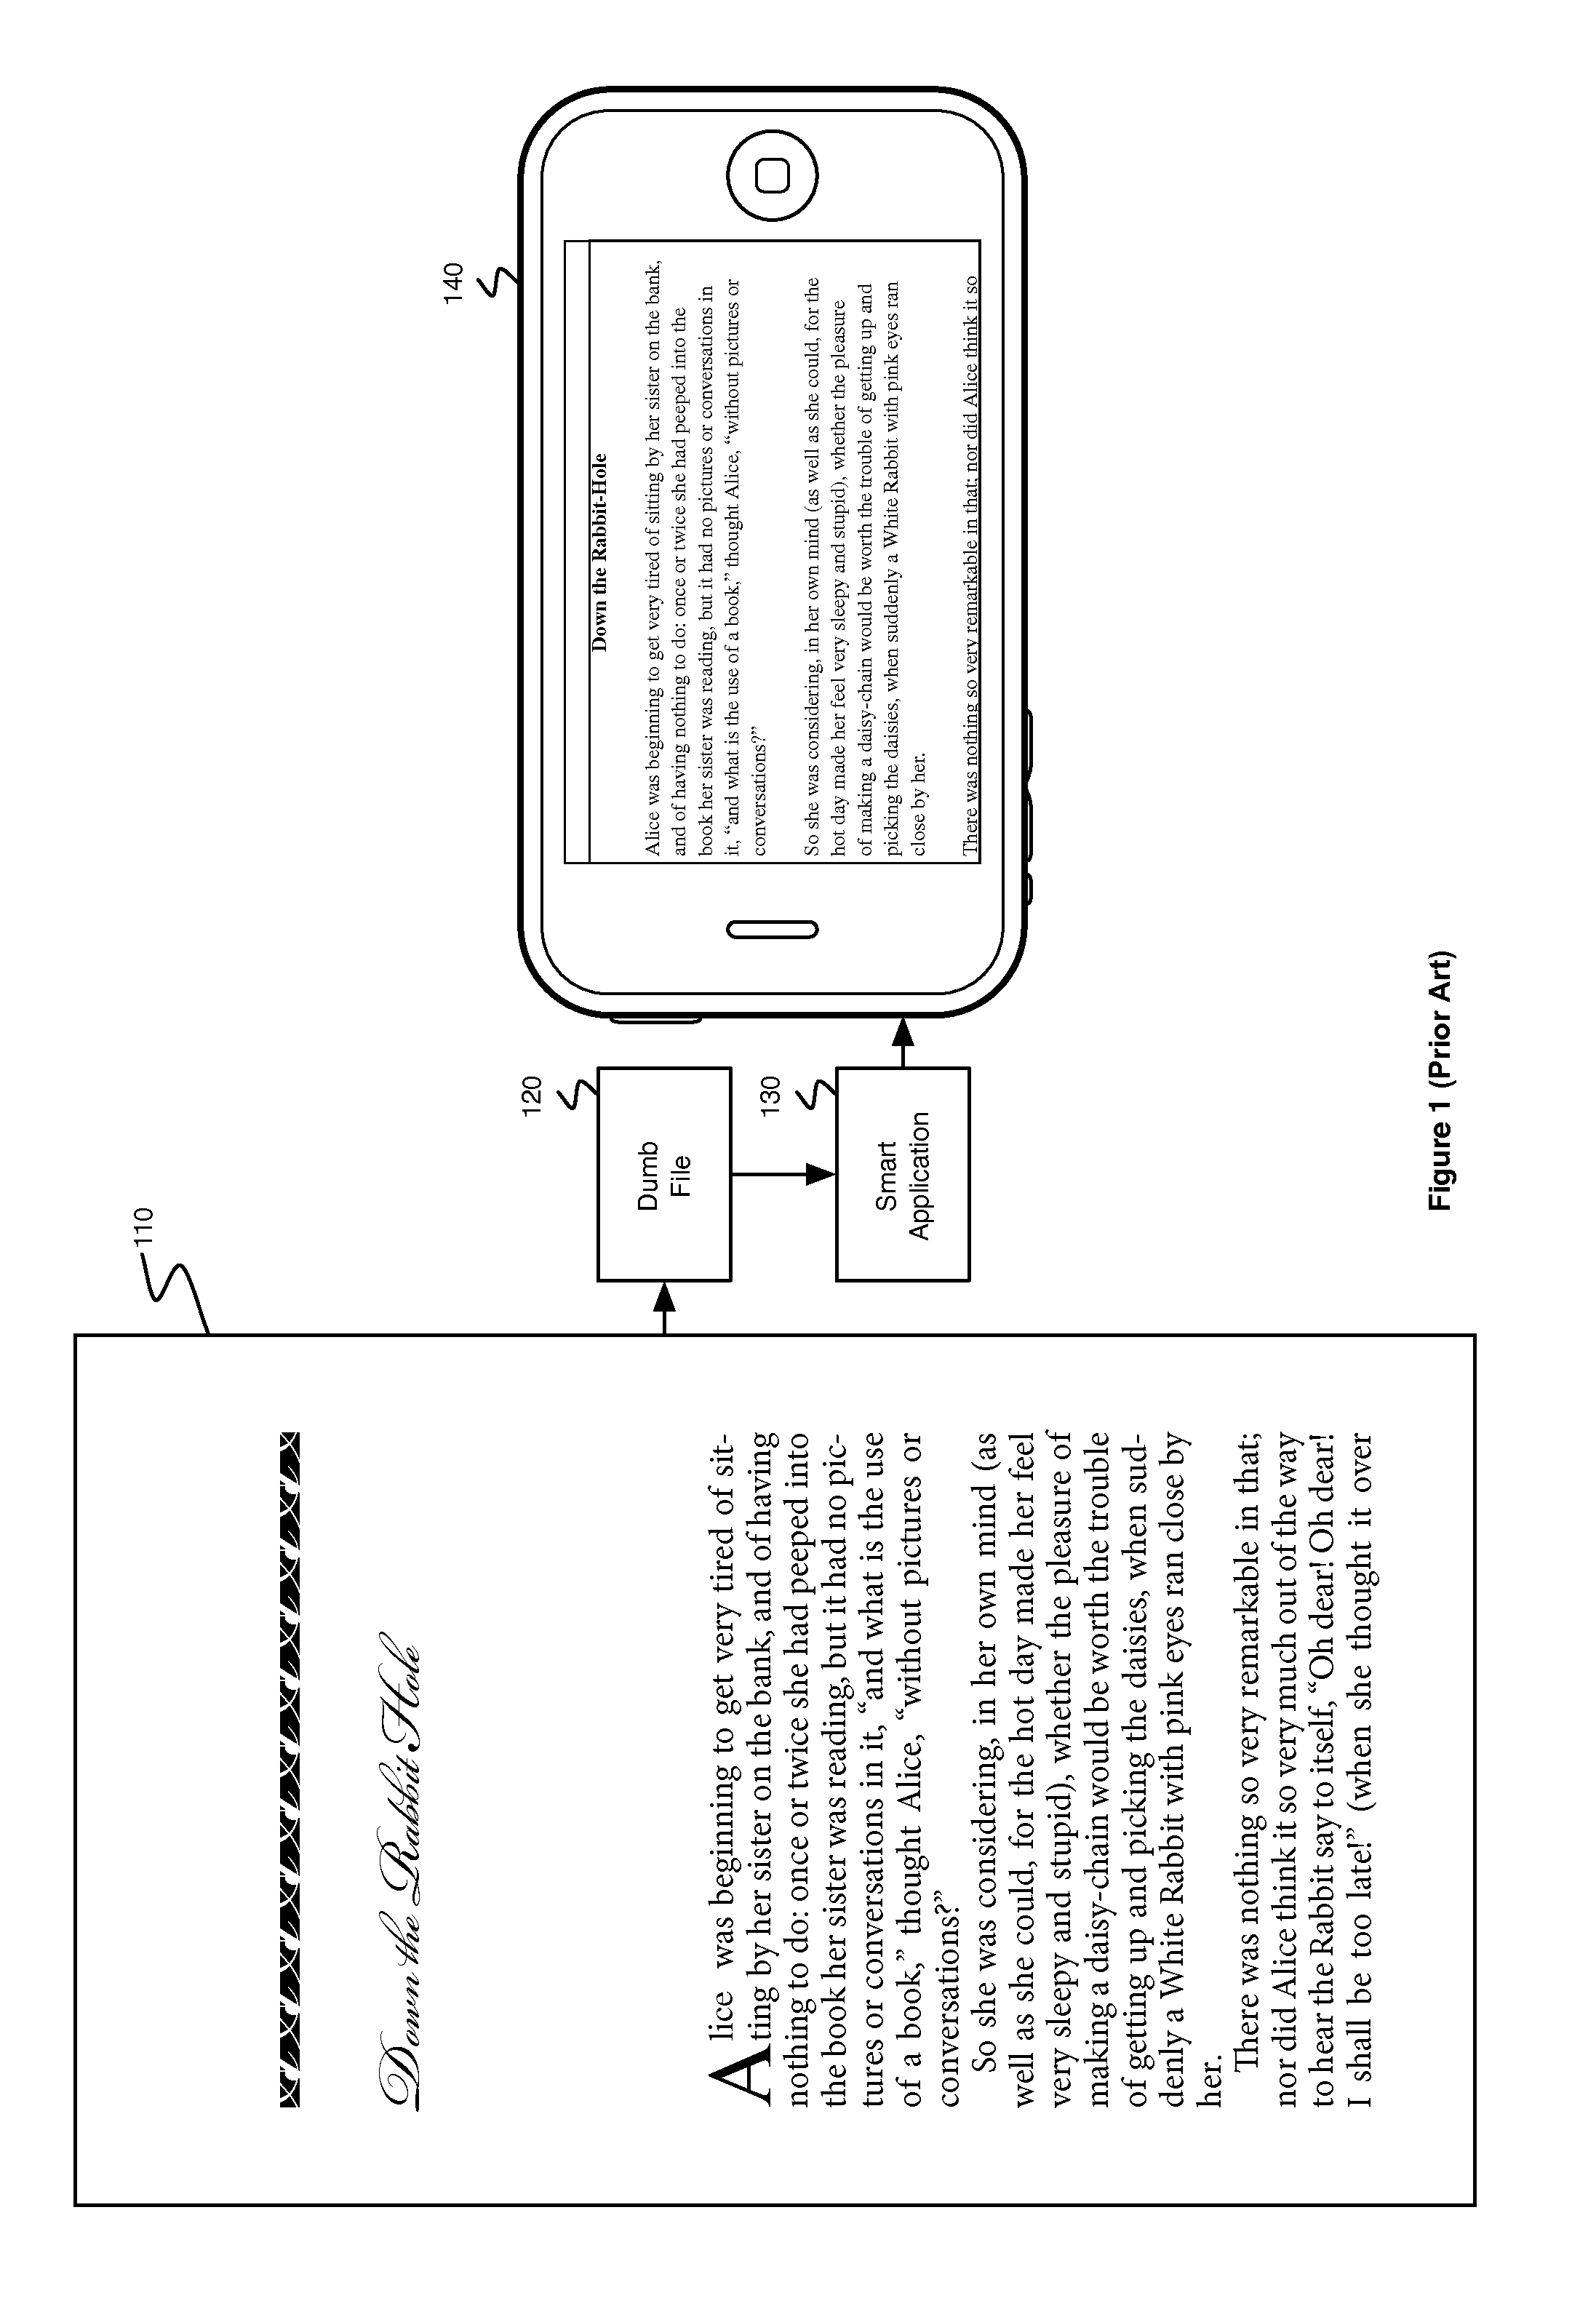 System and method for converting the digital typesetting documents used in publishing to a device-specfic format for electronic publishing